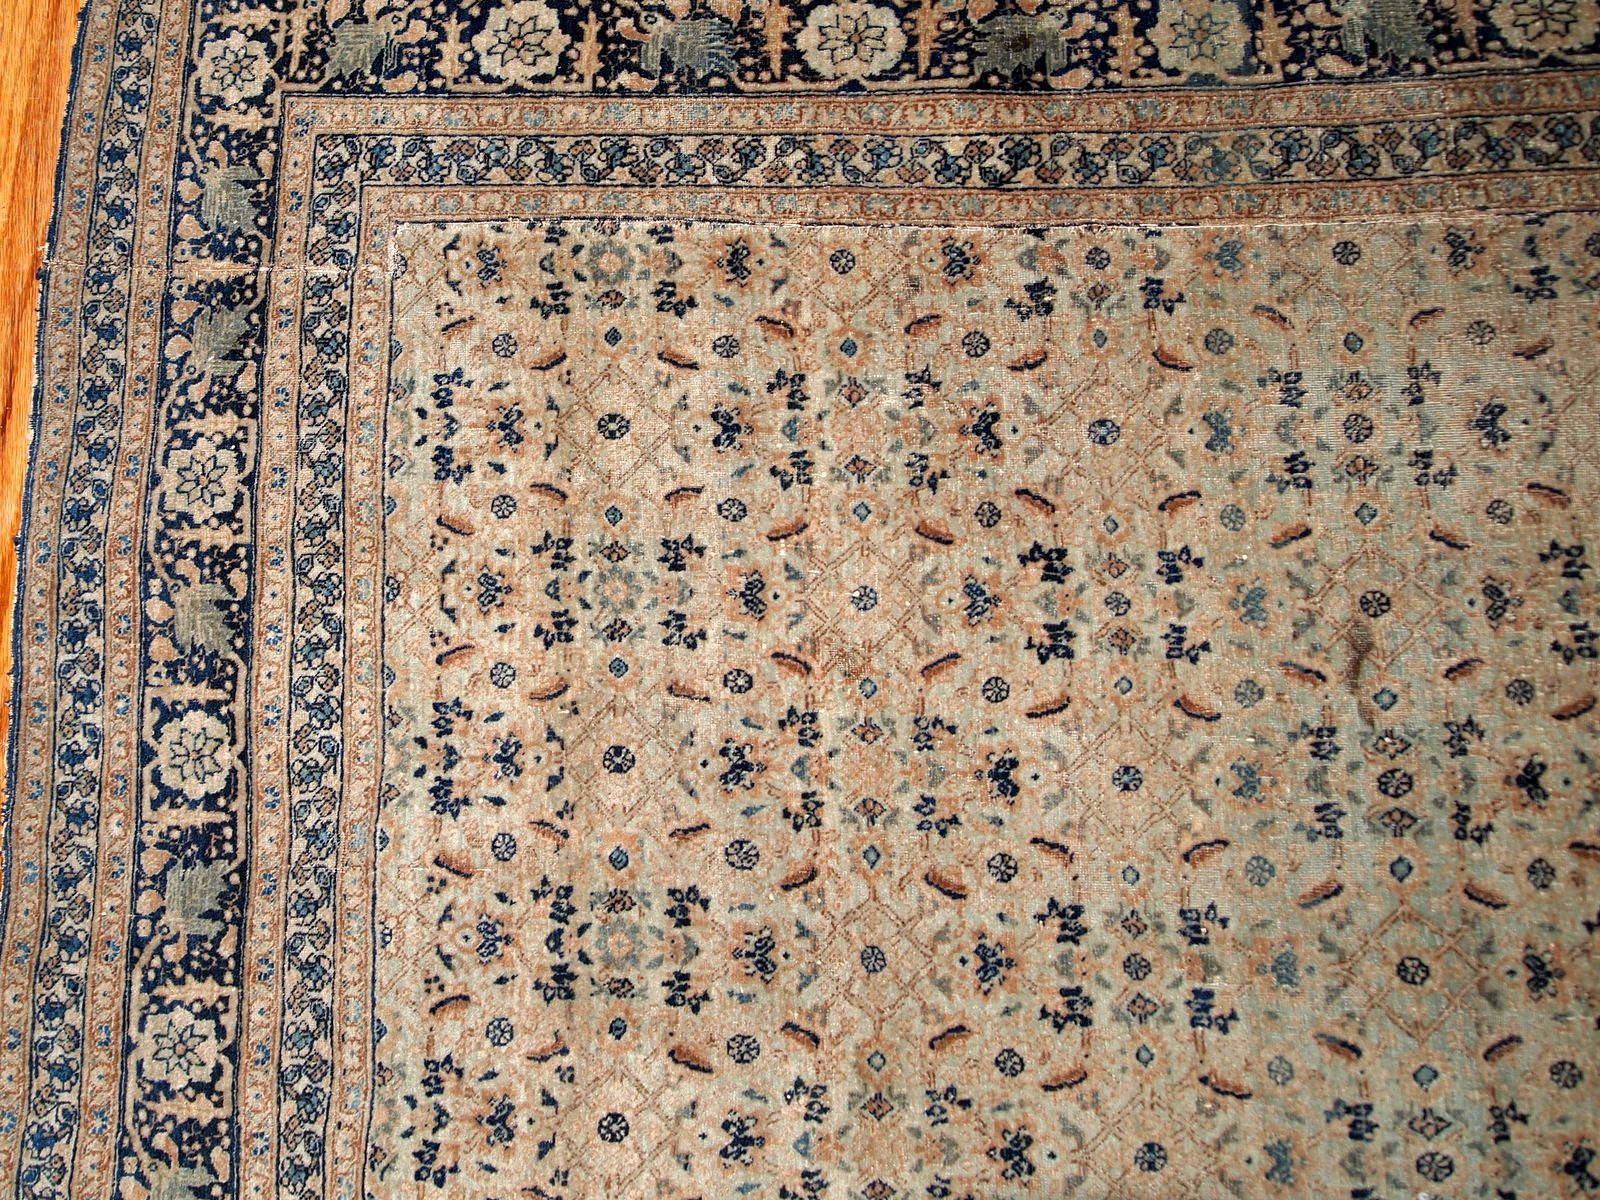 Antique Persian Tabriz Hajalili rug in beige, brown and blue wool. The rug is from the end of 19th century, it has one cut.